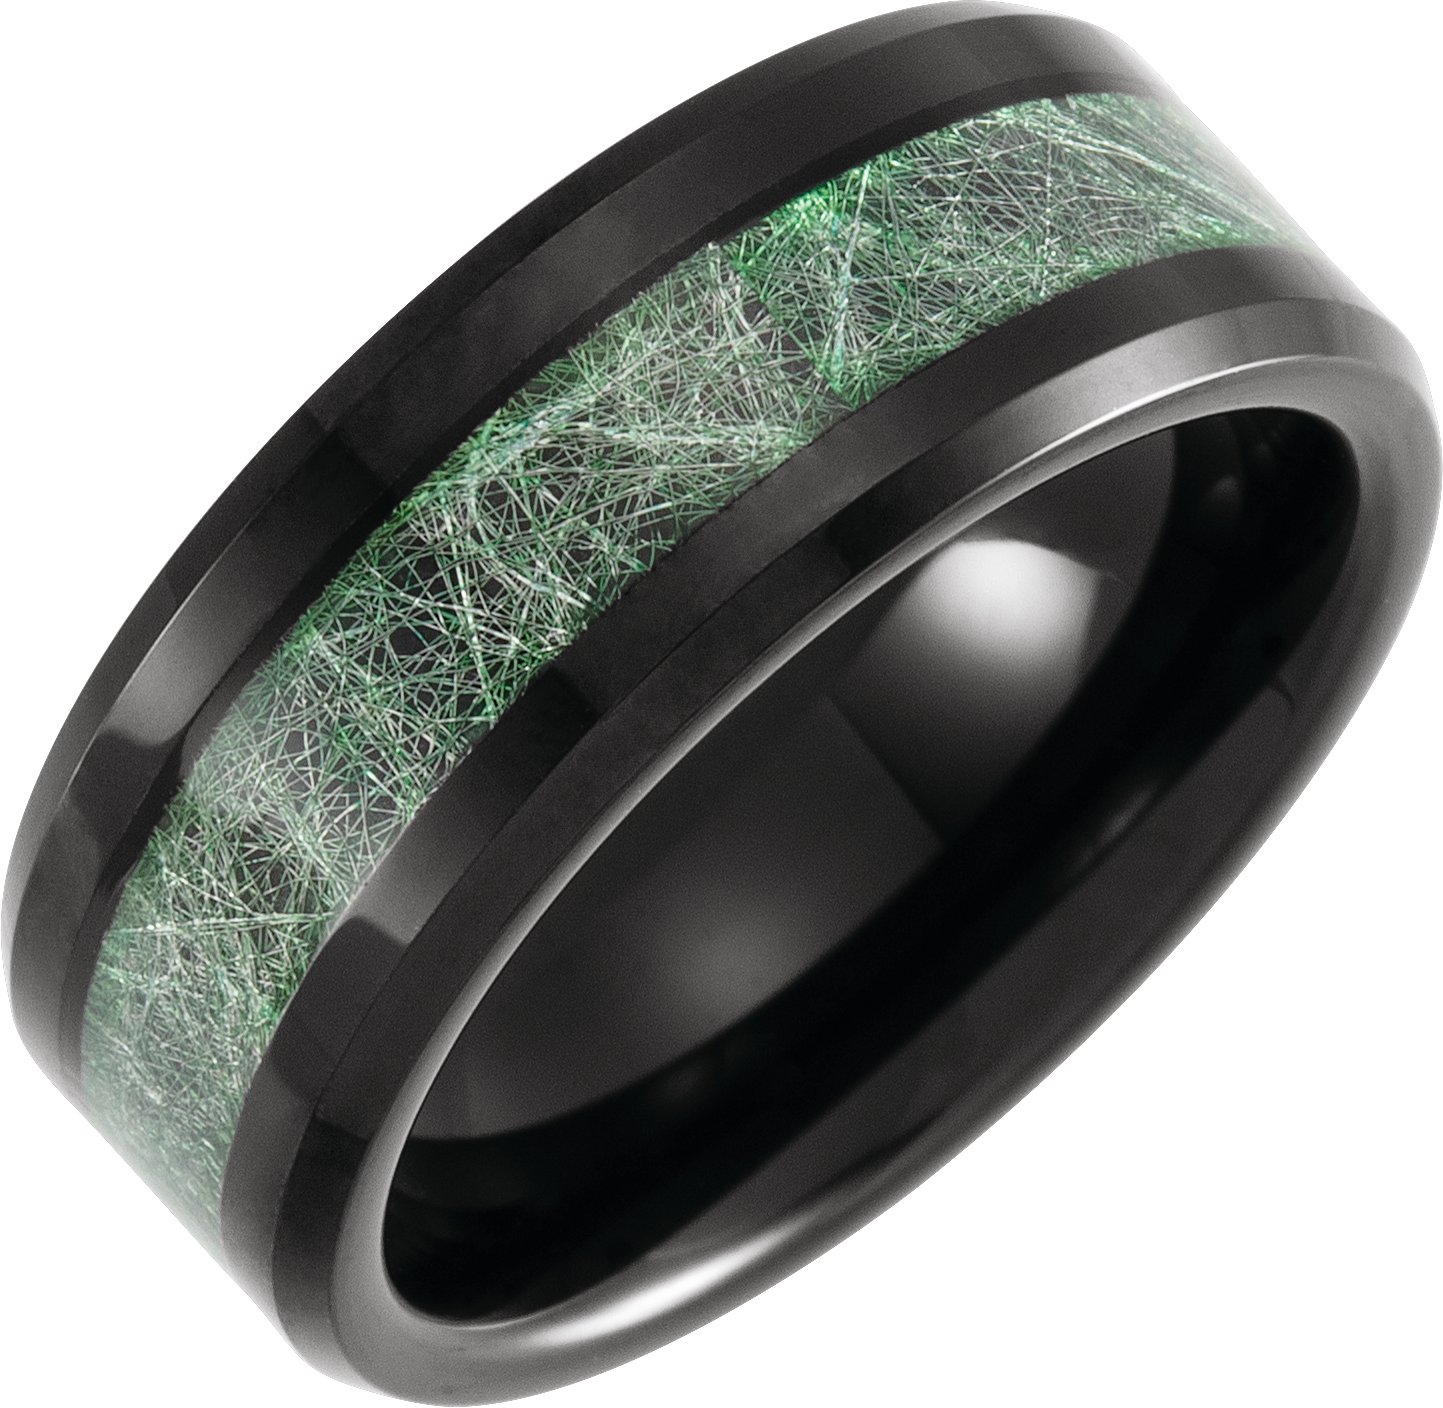 Tungsten 8 mm Beveled Band with Imitation Meteorite Inlay Size 9.5